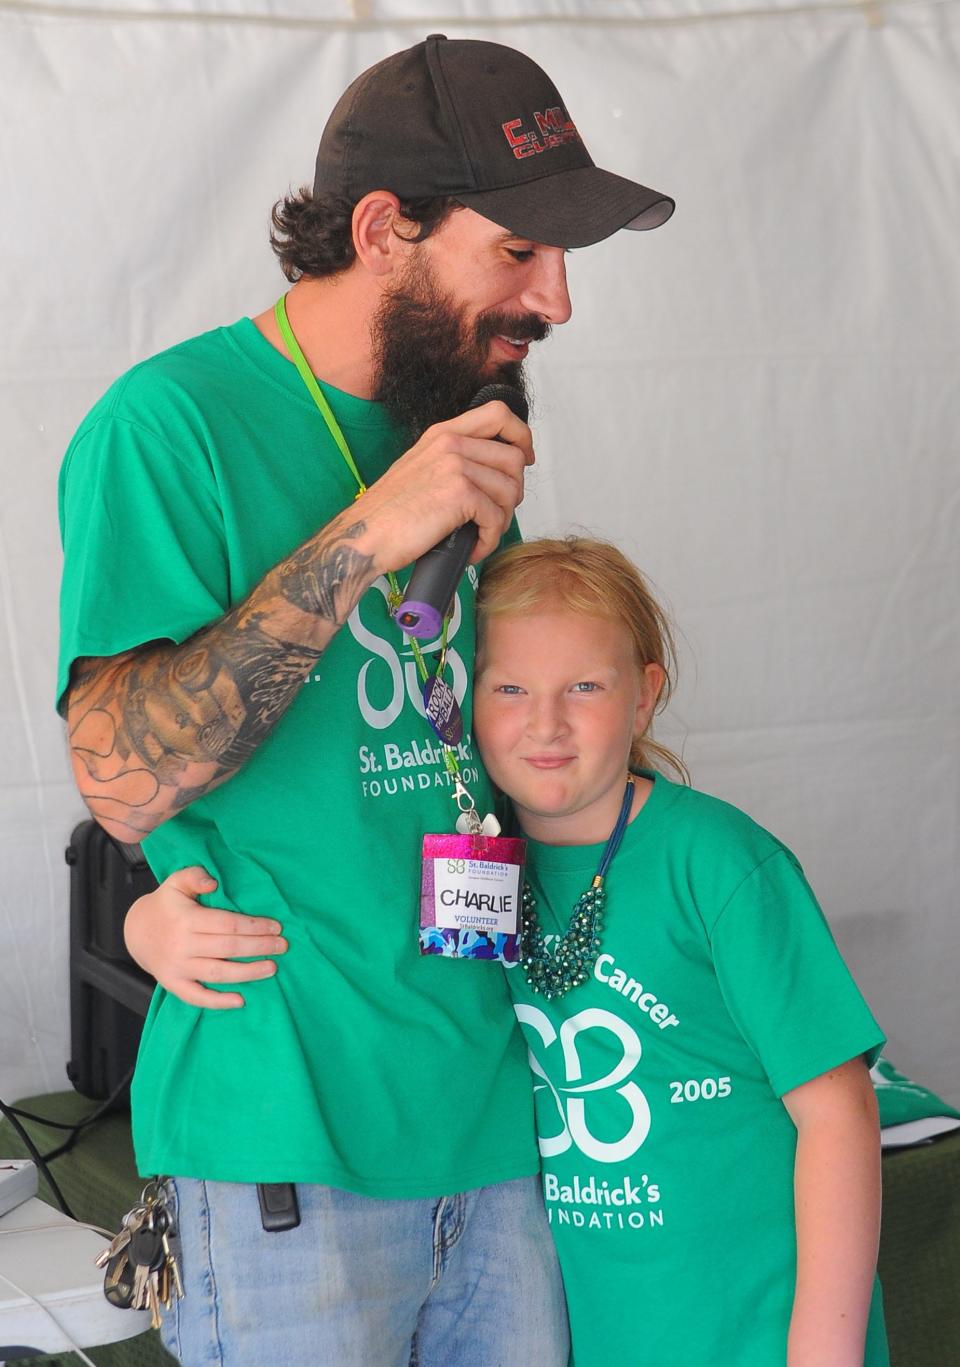 Charlie Miller receives support from his daughter, Carmen, a cancer survivor, during the 7th annual Alliance St. Baldrick's event that benefits the foundation that fights to help children battling cancer. Miller raised more than $1,100 in donations for the Sept. 18, 2022, event, which raises money for cancer research.